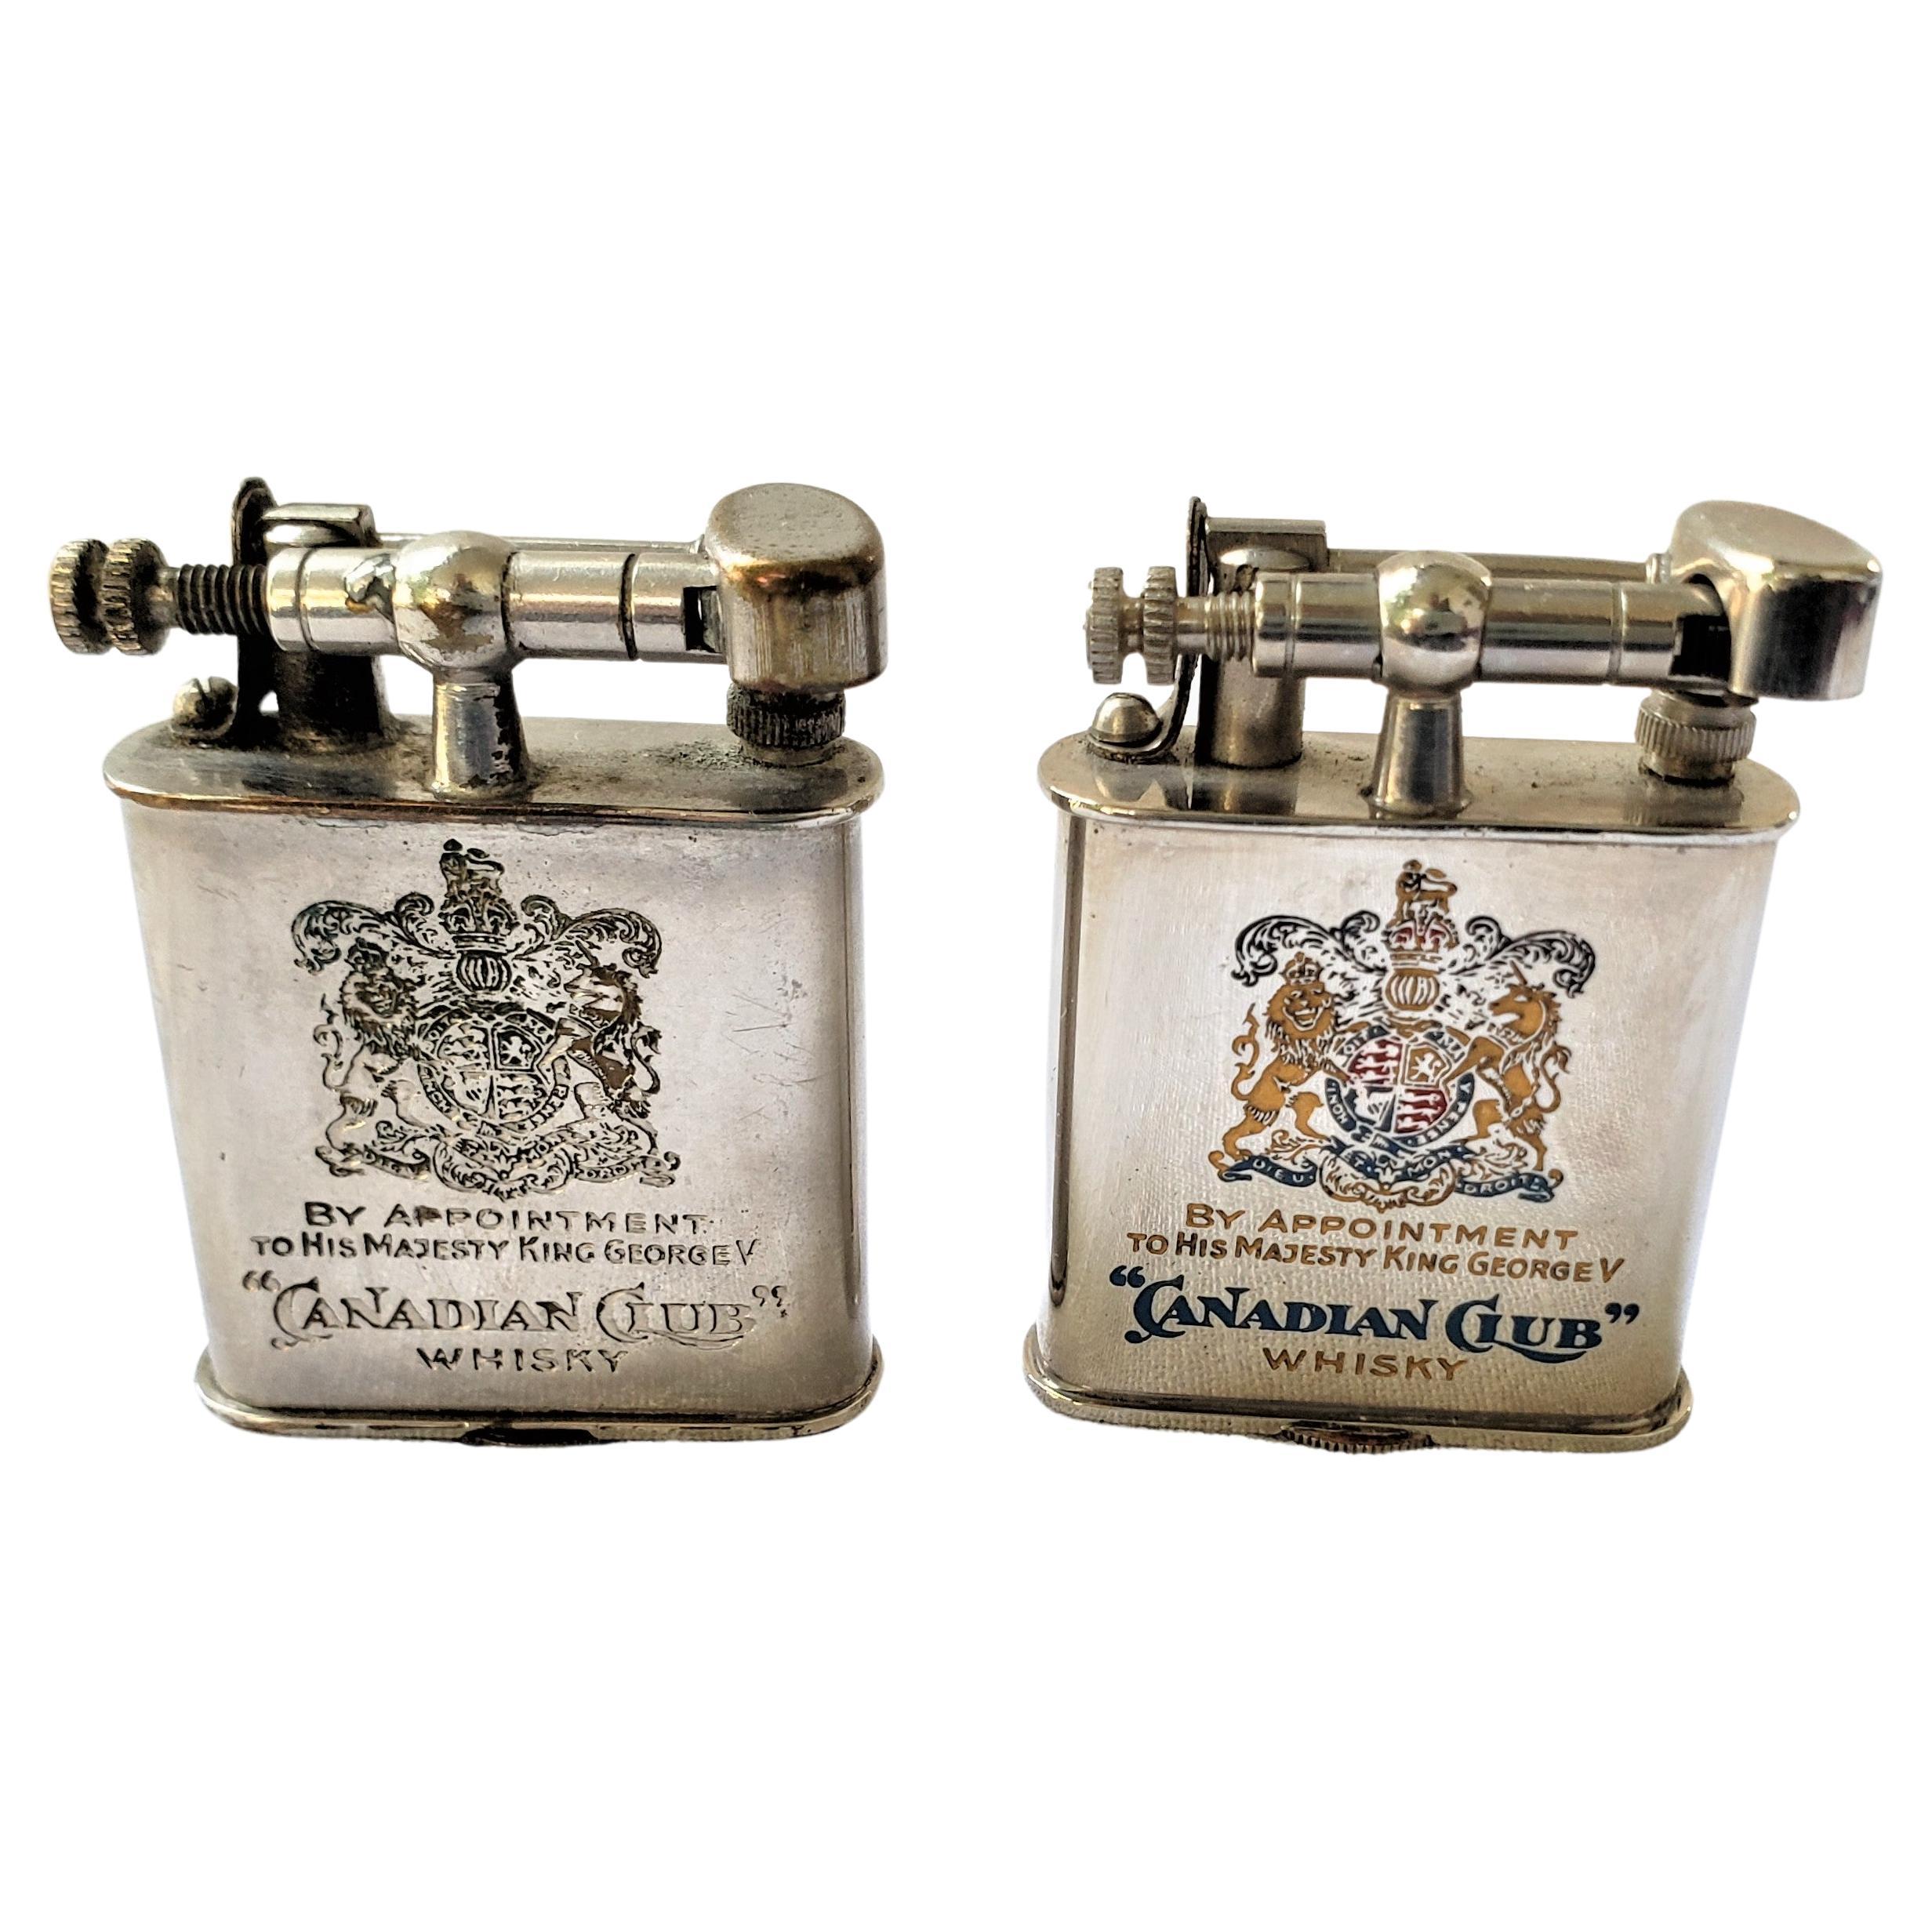 Pair of Antique Canadian Club Whiskey Advertising Swing Arm Pocket Lighters